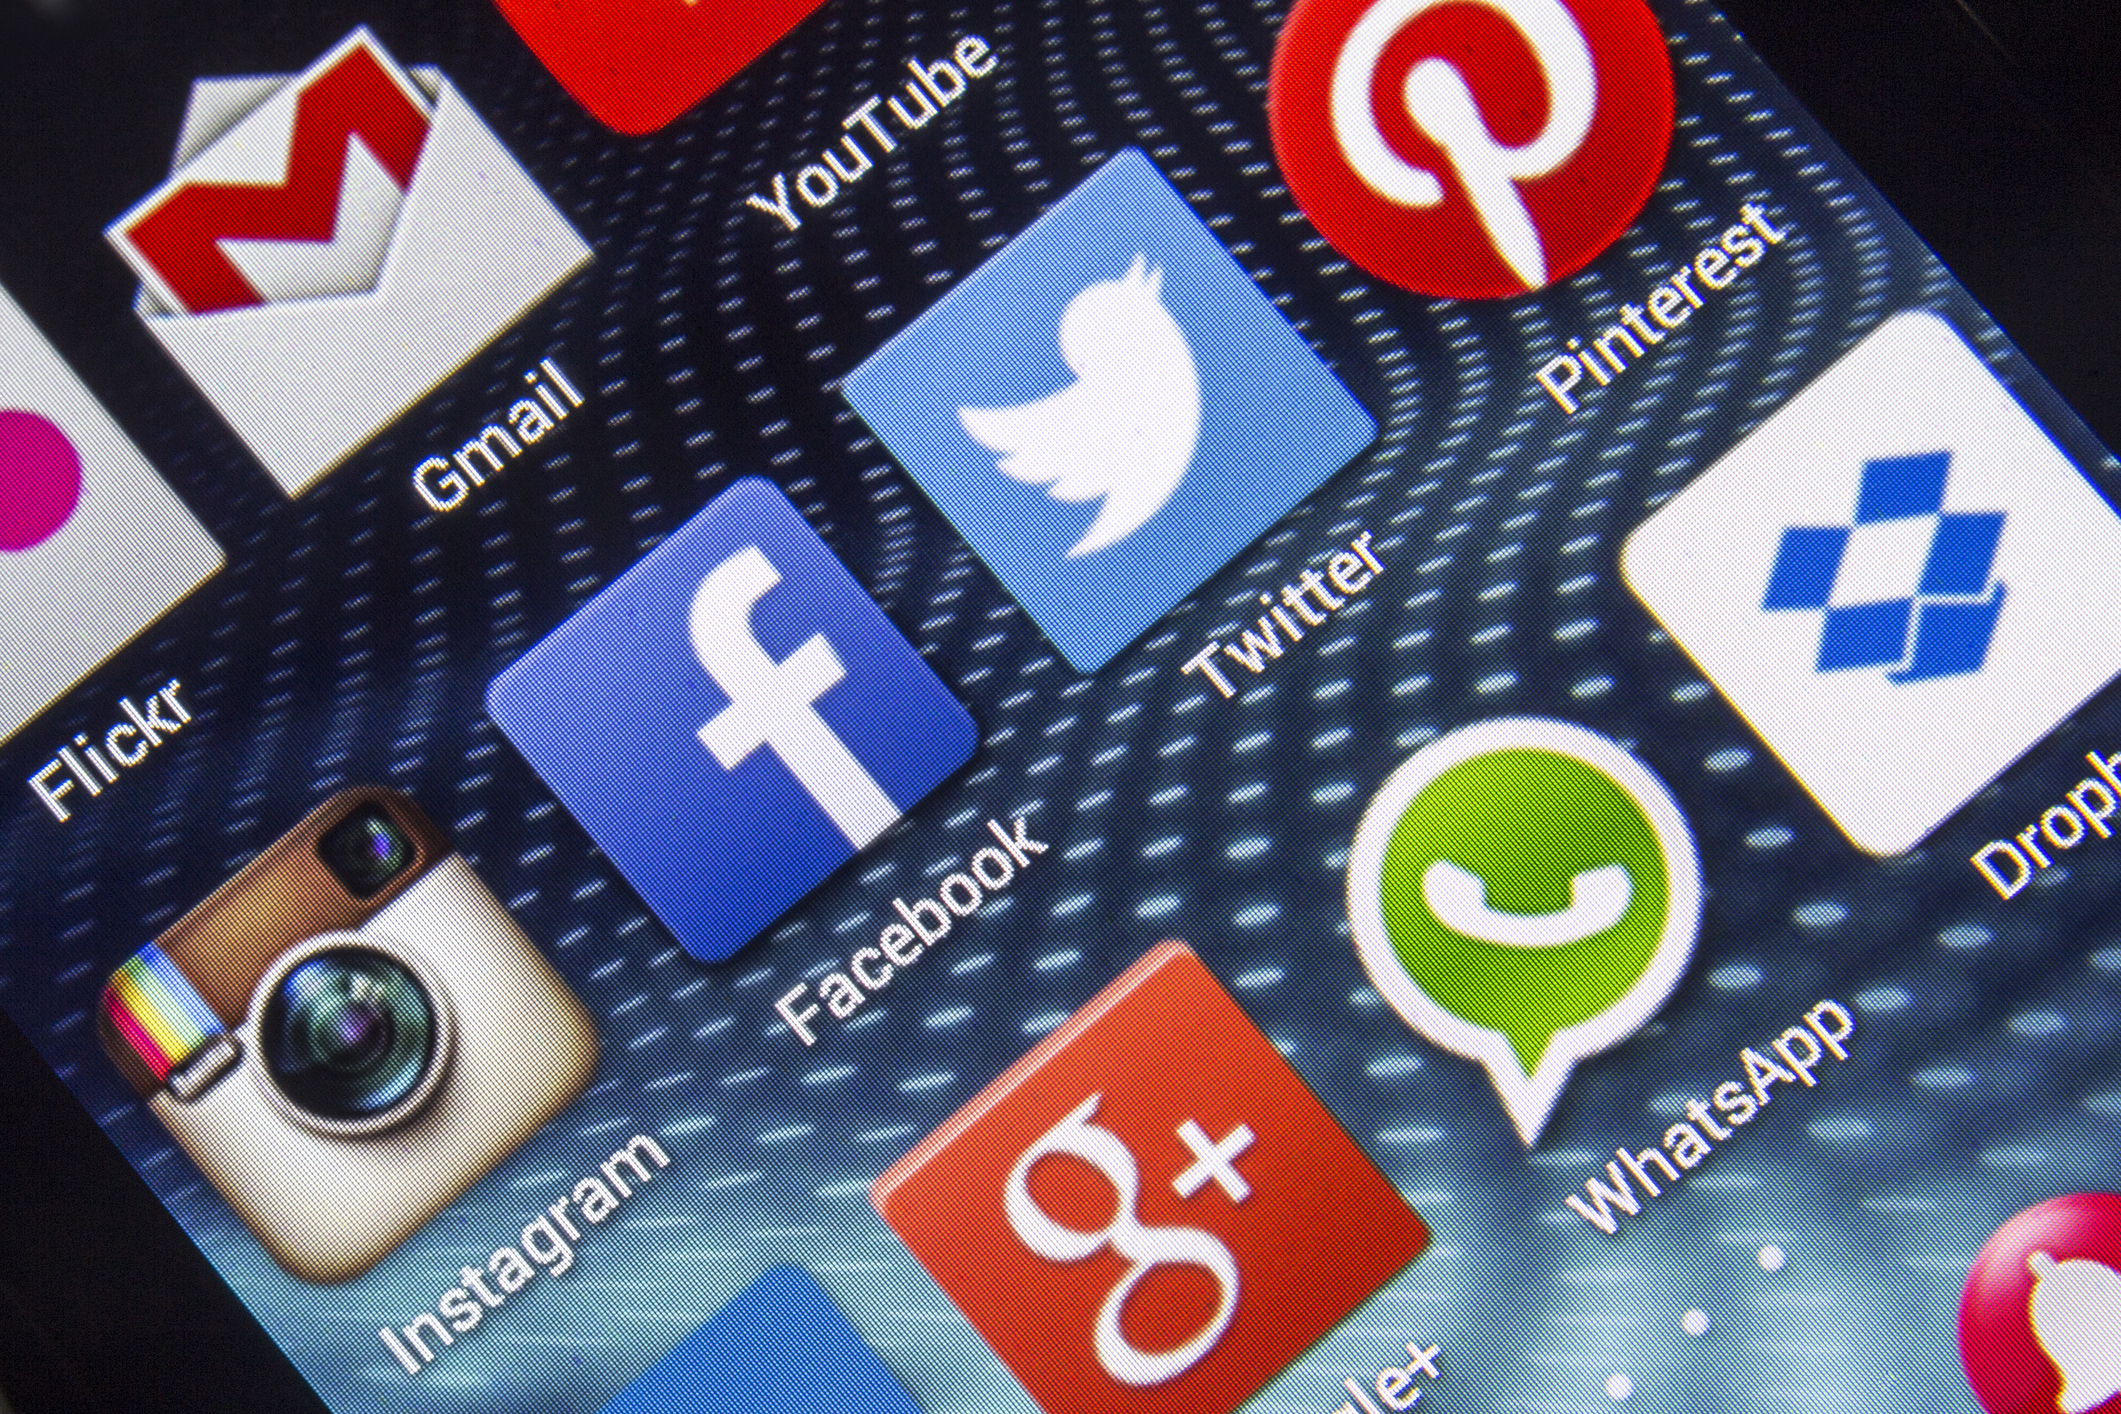 Social media icons on smartphone screen